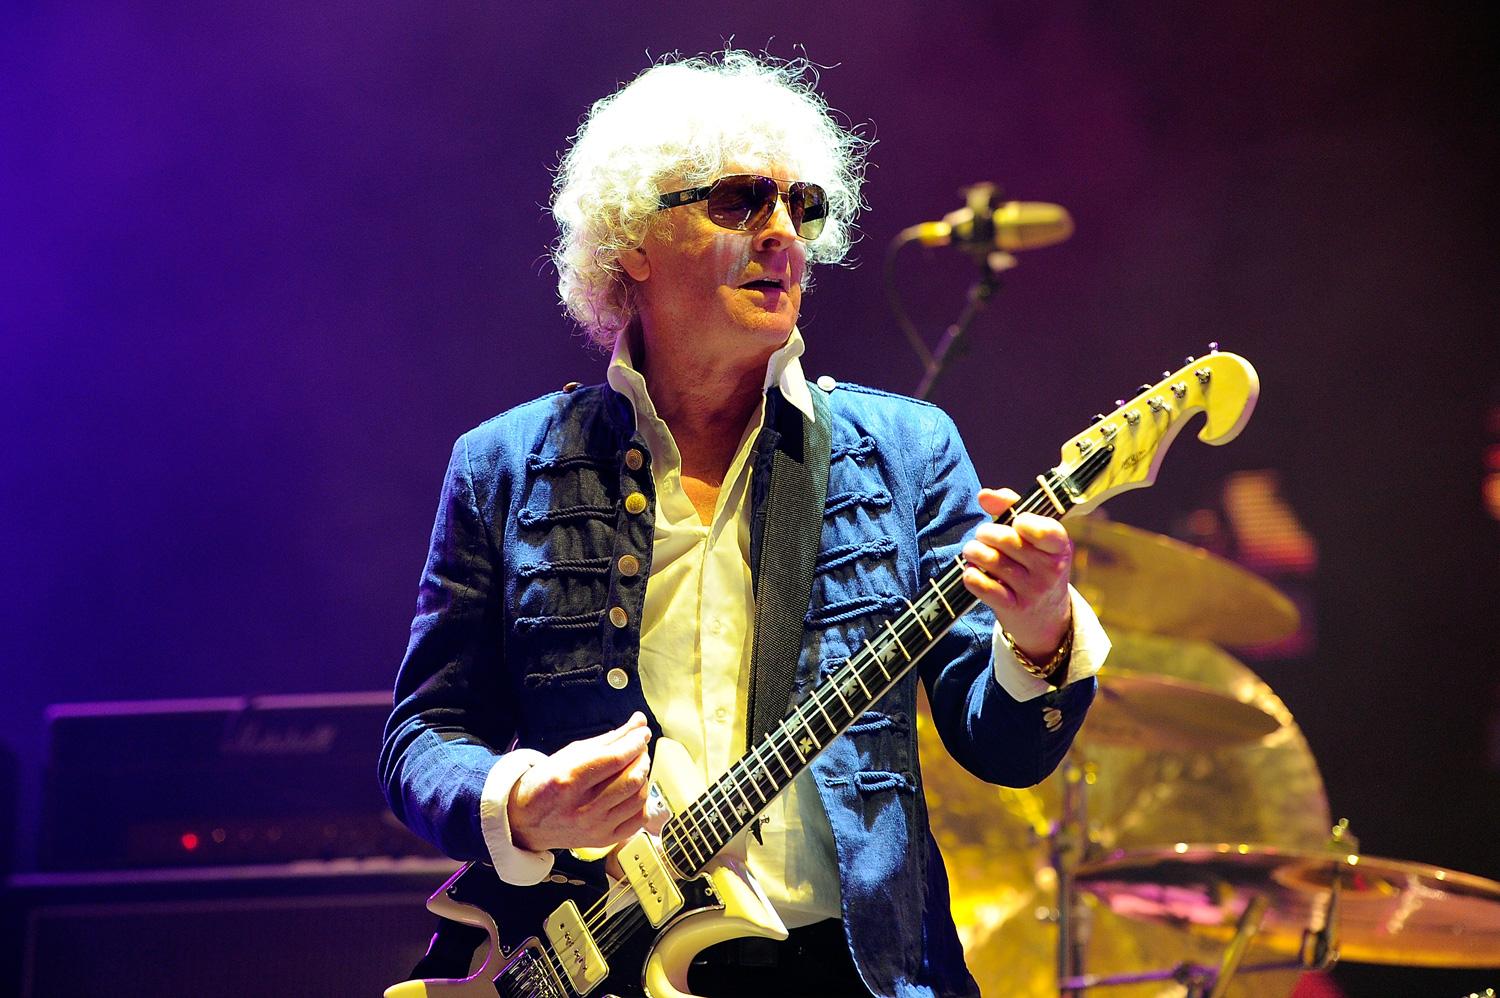 Happy birthday to Ian Hunter - One of the nicest guys you\ll ever meet - Keep on rocking! 